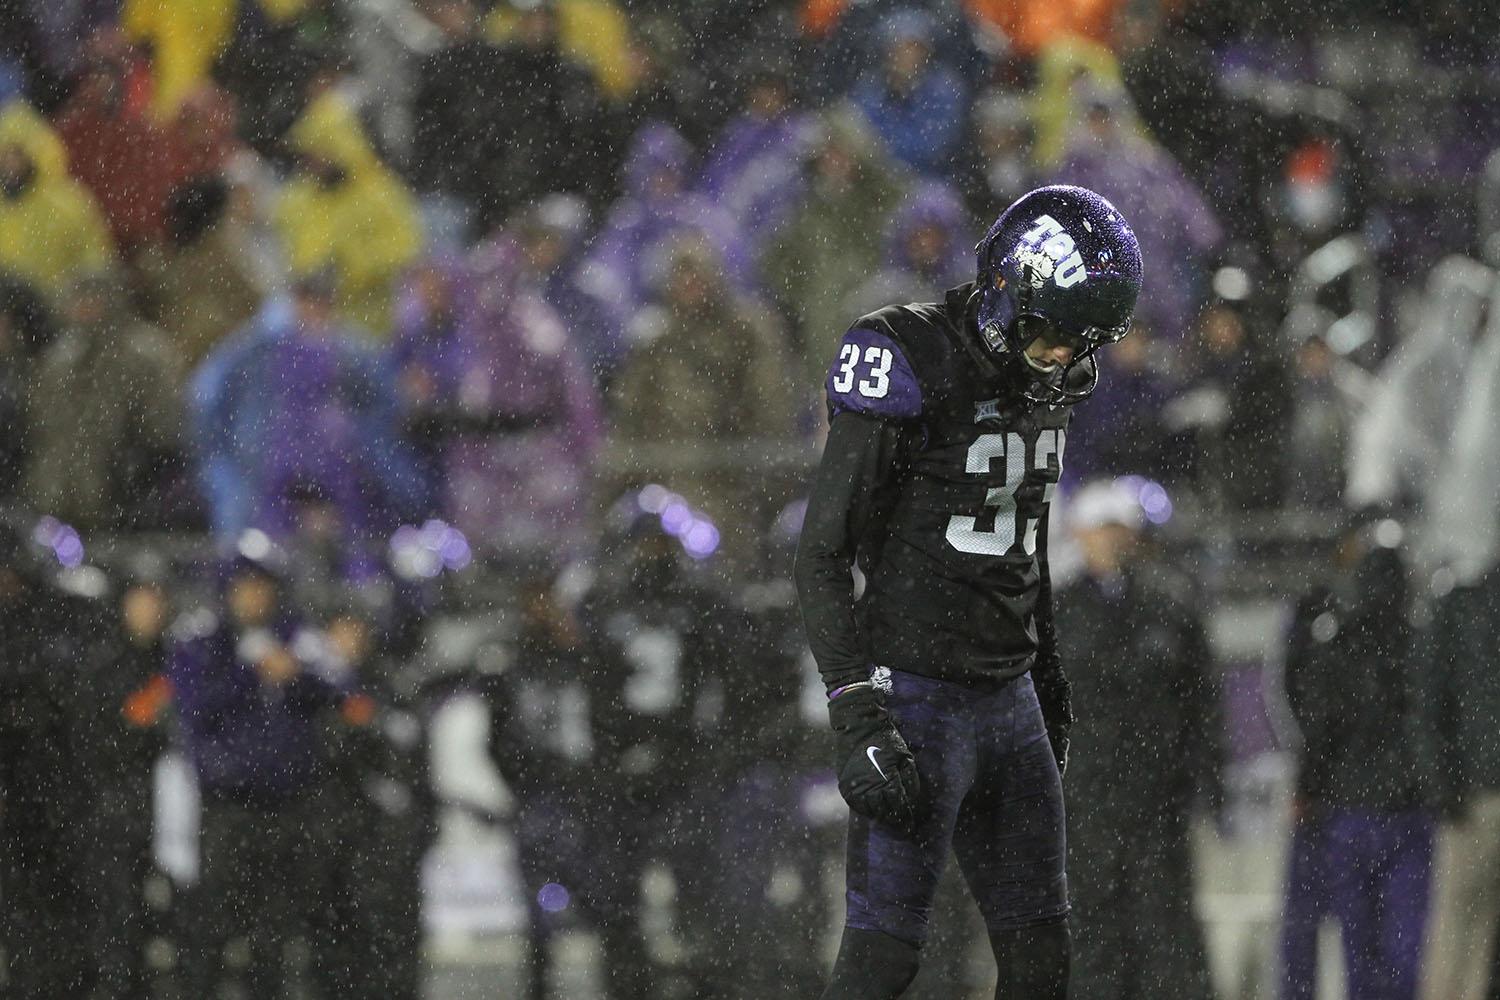 Want+to+remember+the+28-21+win+over+Baylor%3F+Heres+a+collection+of+photos+from+TCU360+photographer+Kelsey+Ritchie.